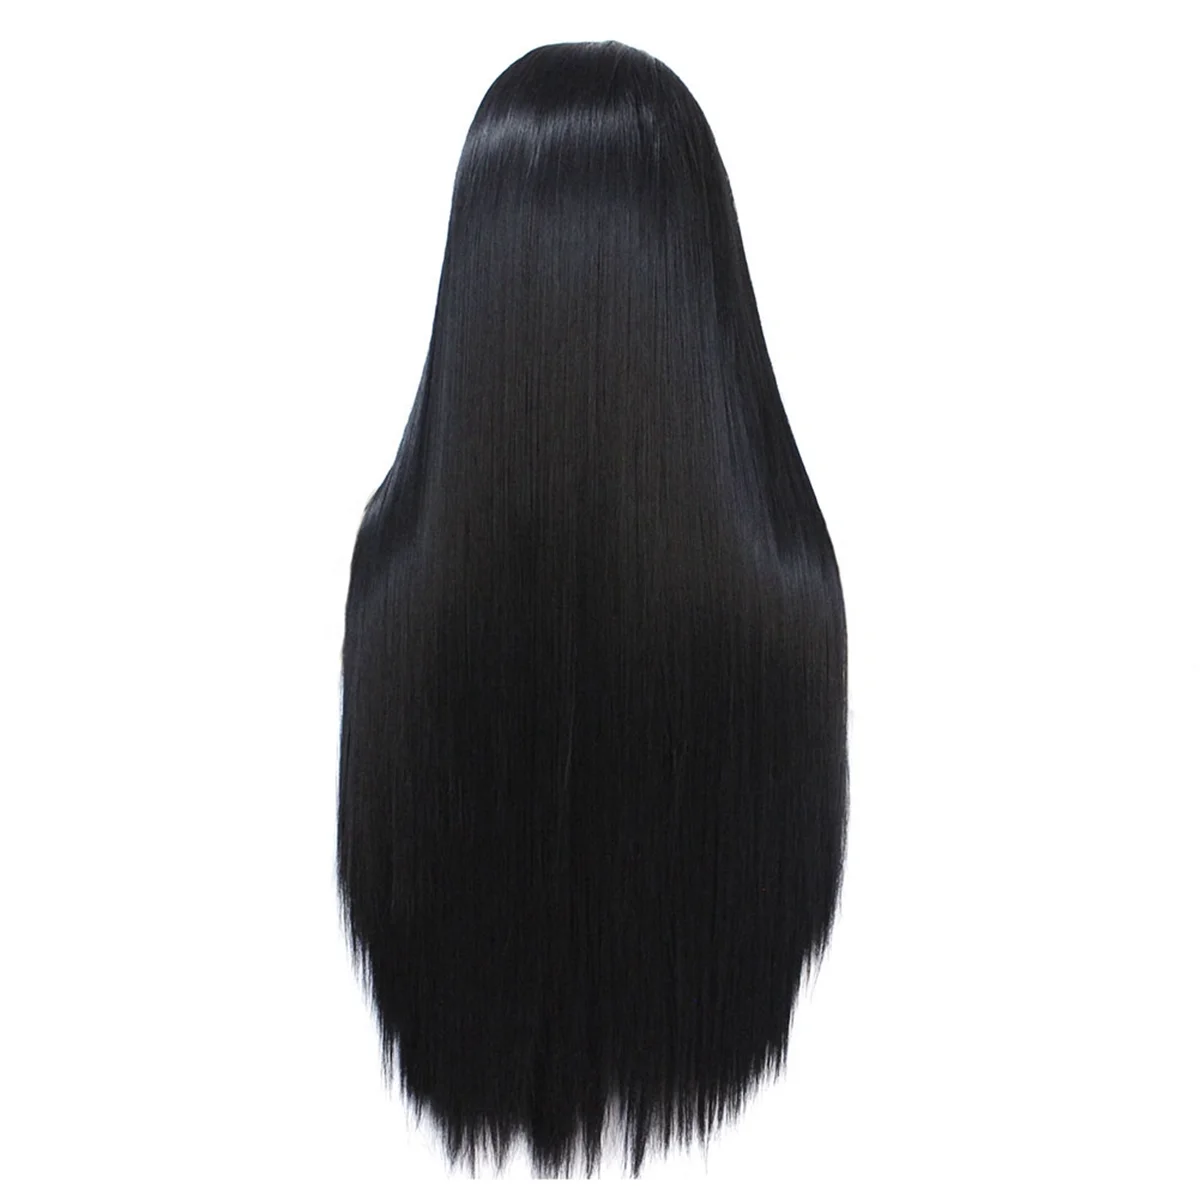 

16 Inch Full Lace Wig Bone Straight Human-Hair Wigs for Black Women Hd Straight Lace Frontal Wig Glueless Preplucked